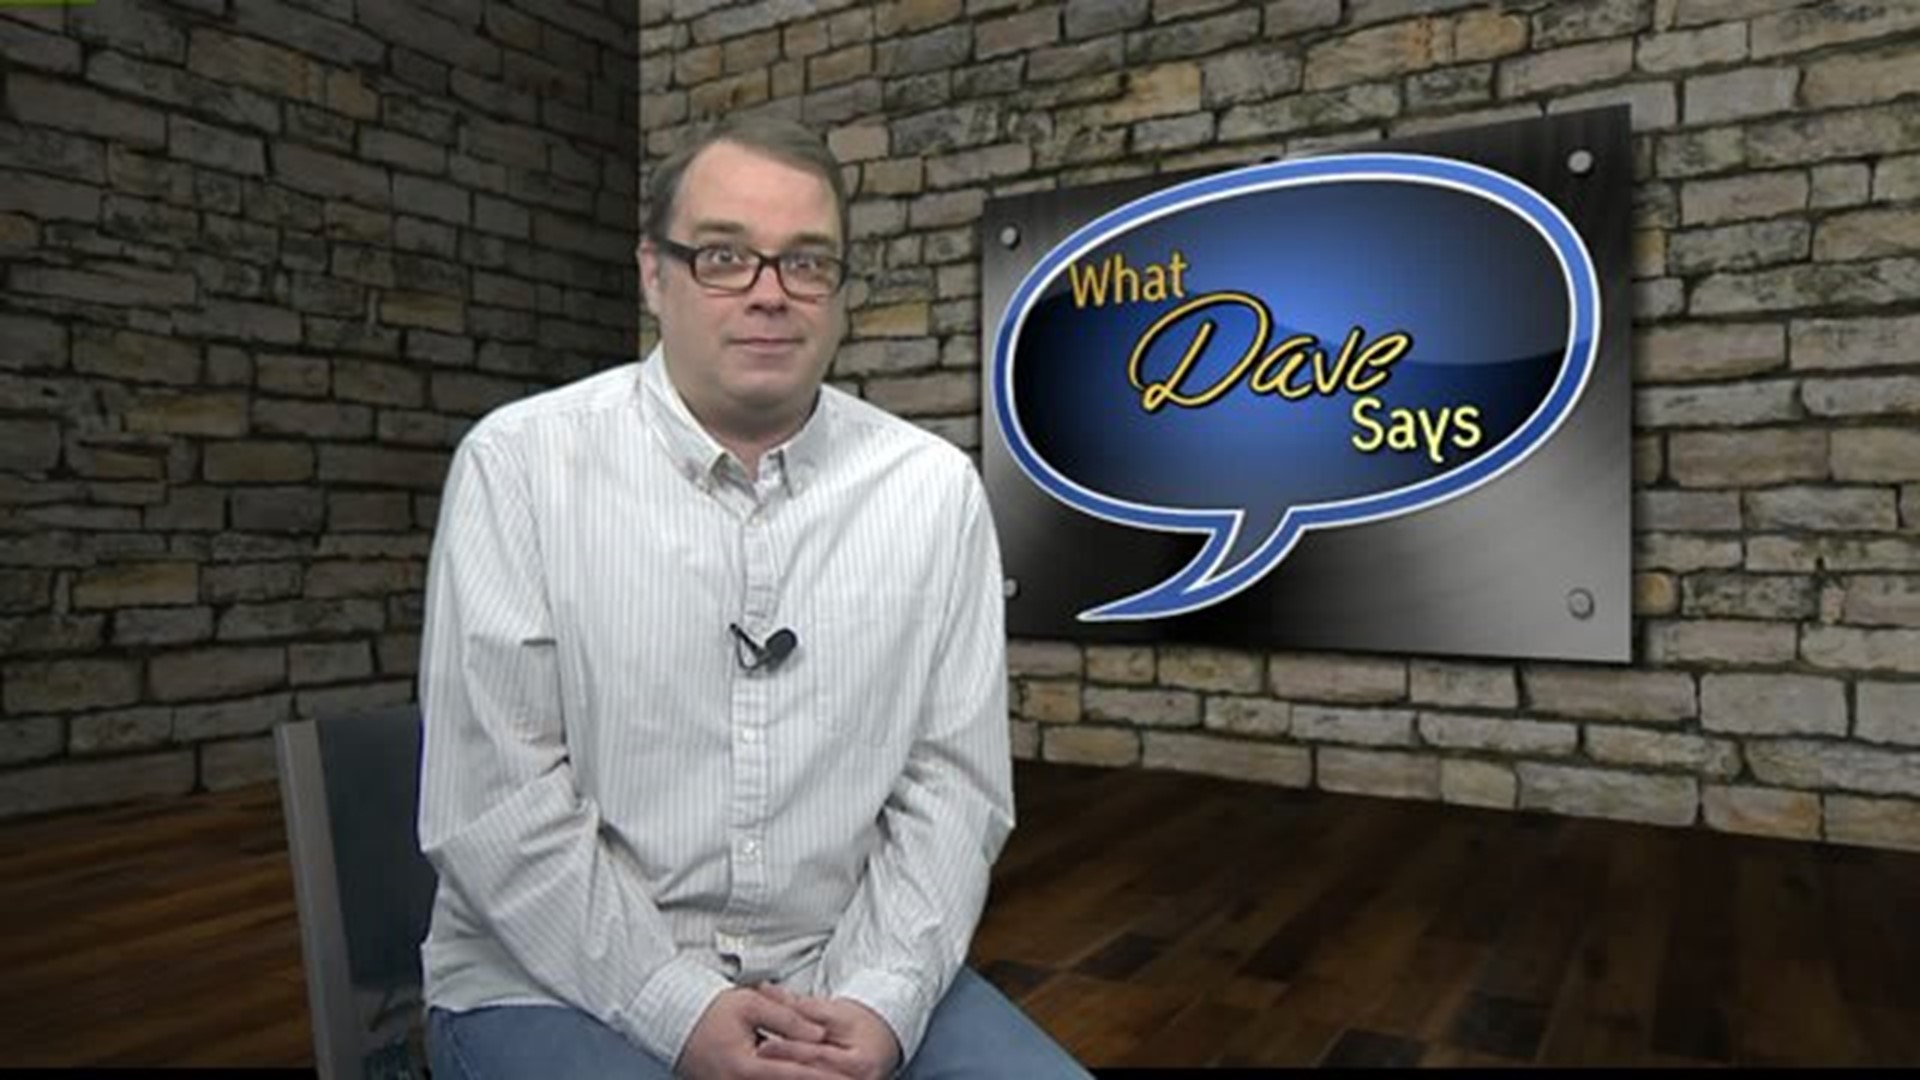 What Dave Says about unity - or lack of it - in the Quad Cities